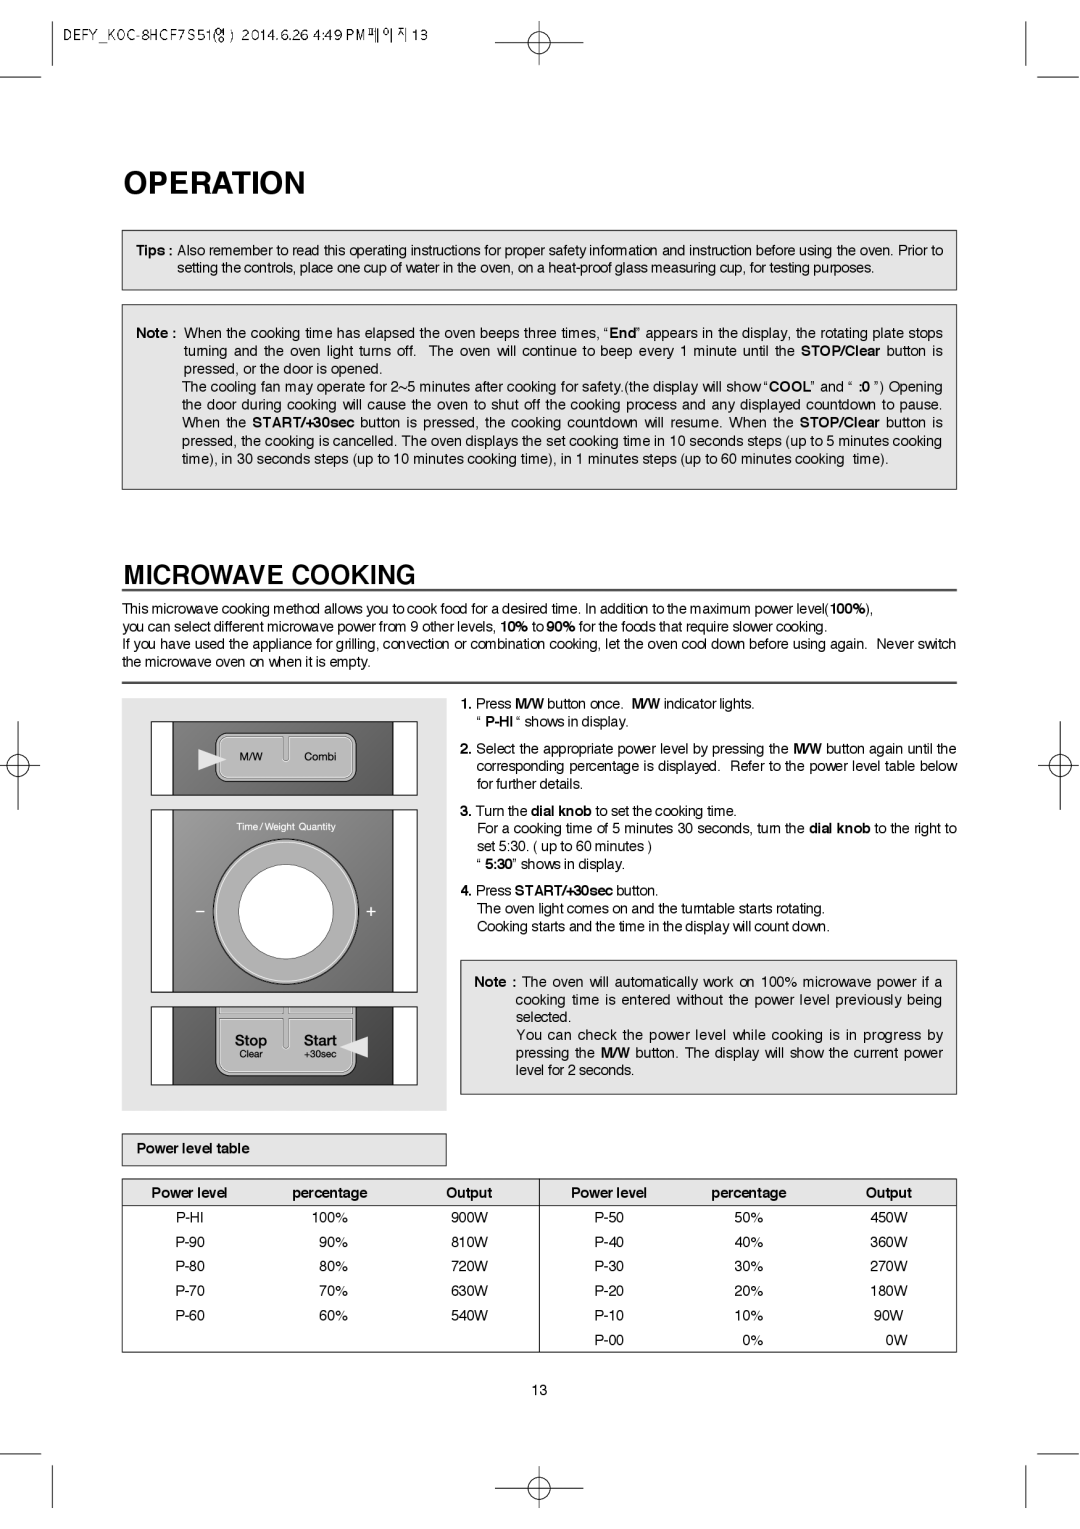 Defy Appliances MWA 2434 MM user manual Operation, Microwave Cooking, 900W 